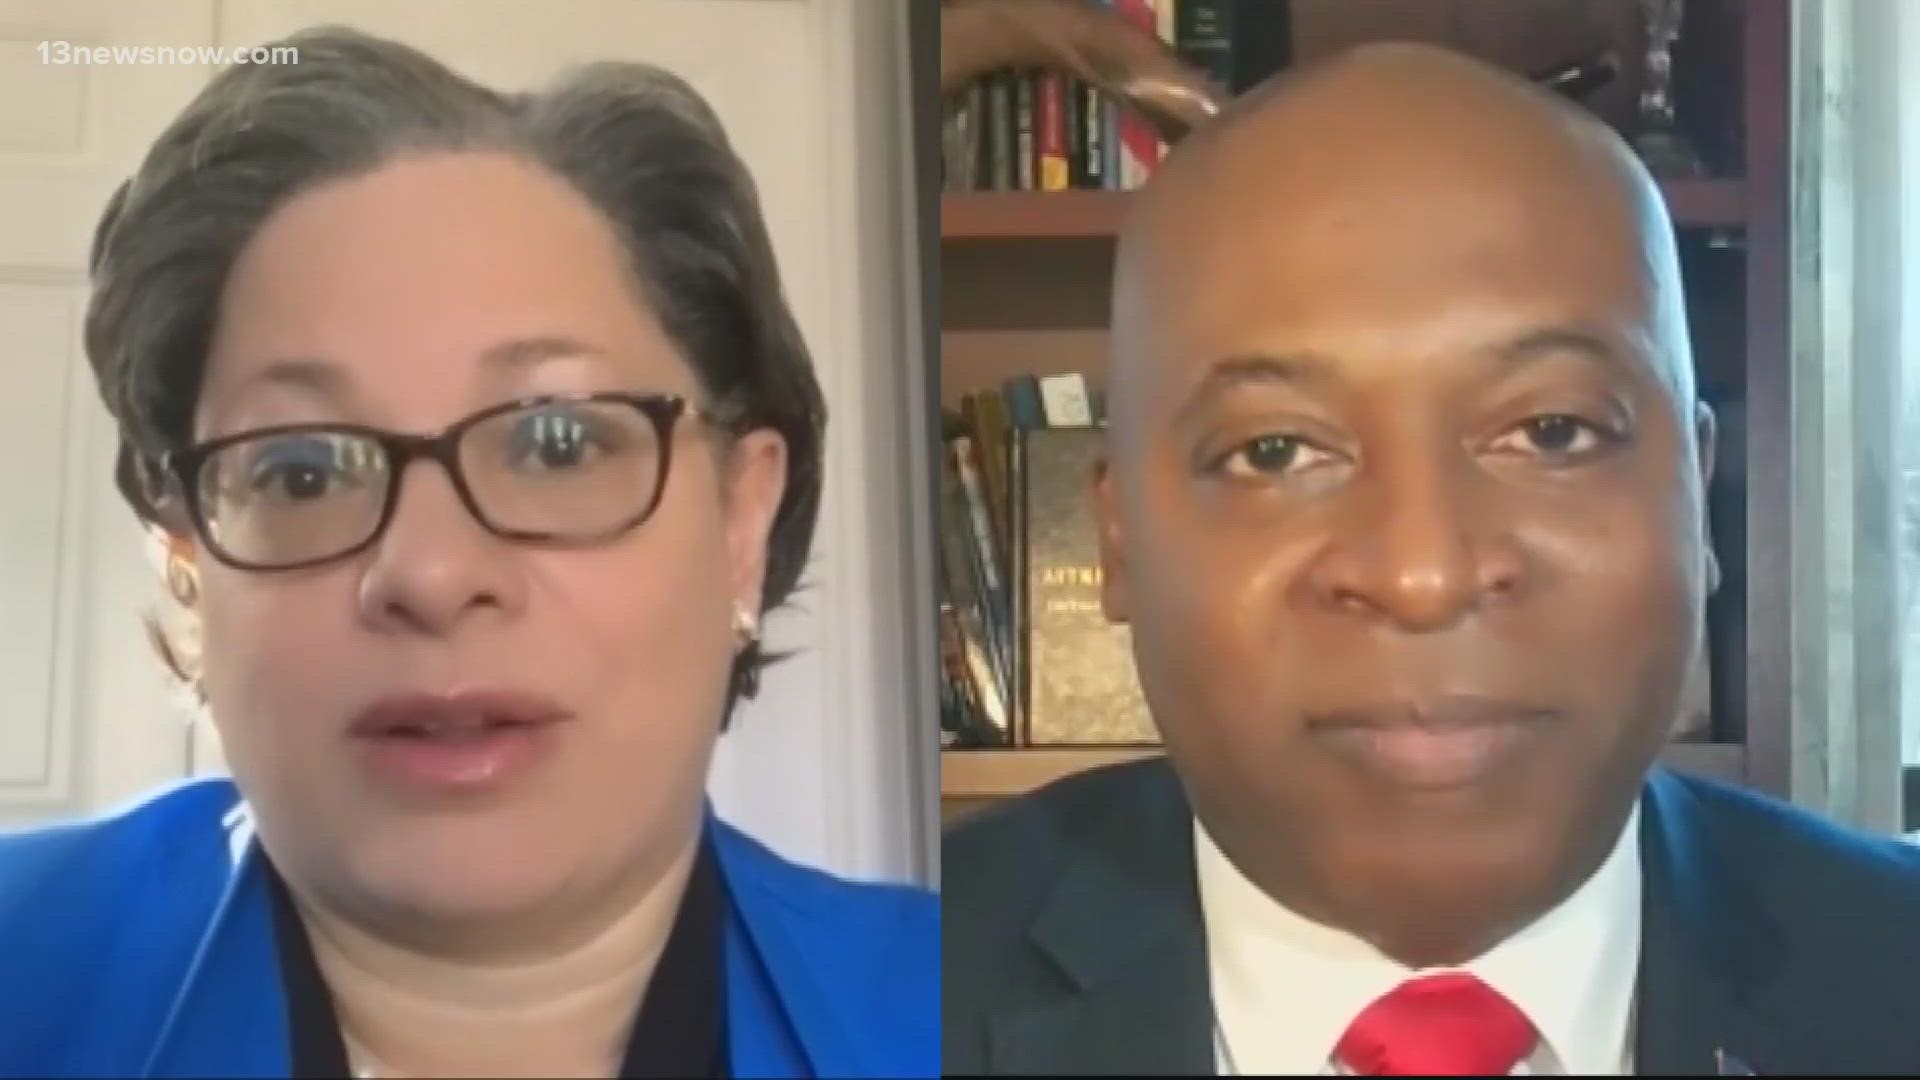 It's a special election to replace the late Donald McEachin who died in late November. The race features Democrat Jennifer McClellan and Republican Leon Benjamin.